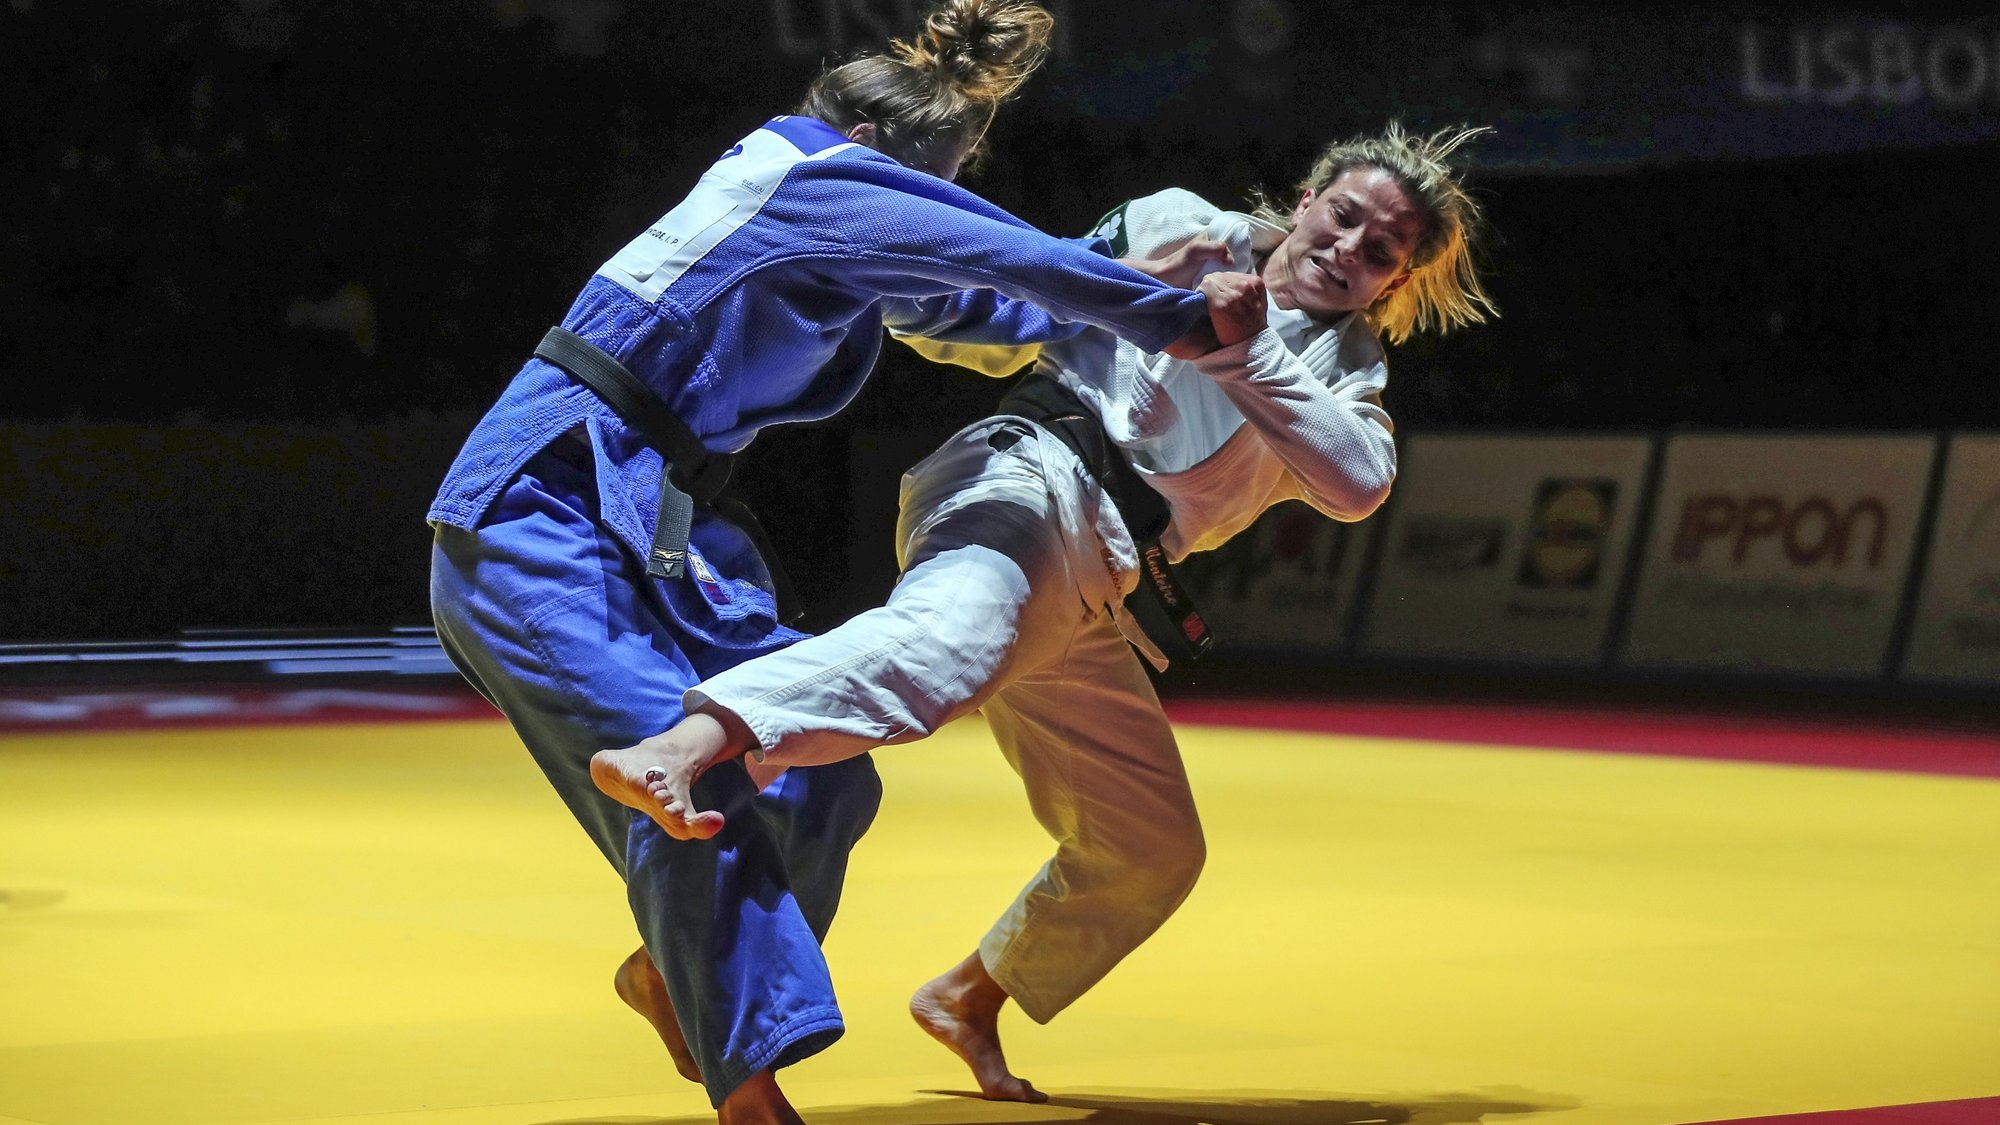 Telma Monteiro of Portugal (white) and Kaja Kajzer of Slovenia (blue) in action during the gold medal match in the woman&#039;s -57kg category at the European Judo Championships in Lisbon, Portugal, 16 April 2021. NUNO VEIGA/LUSA